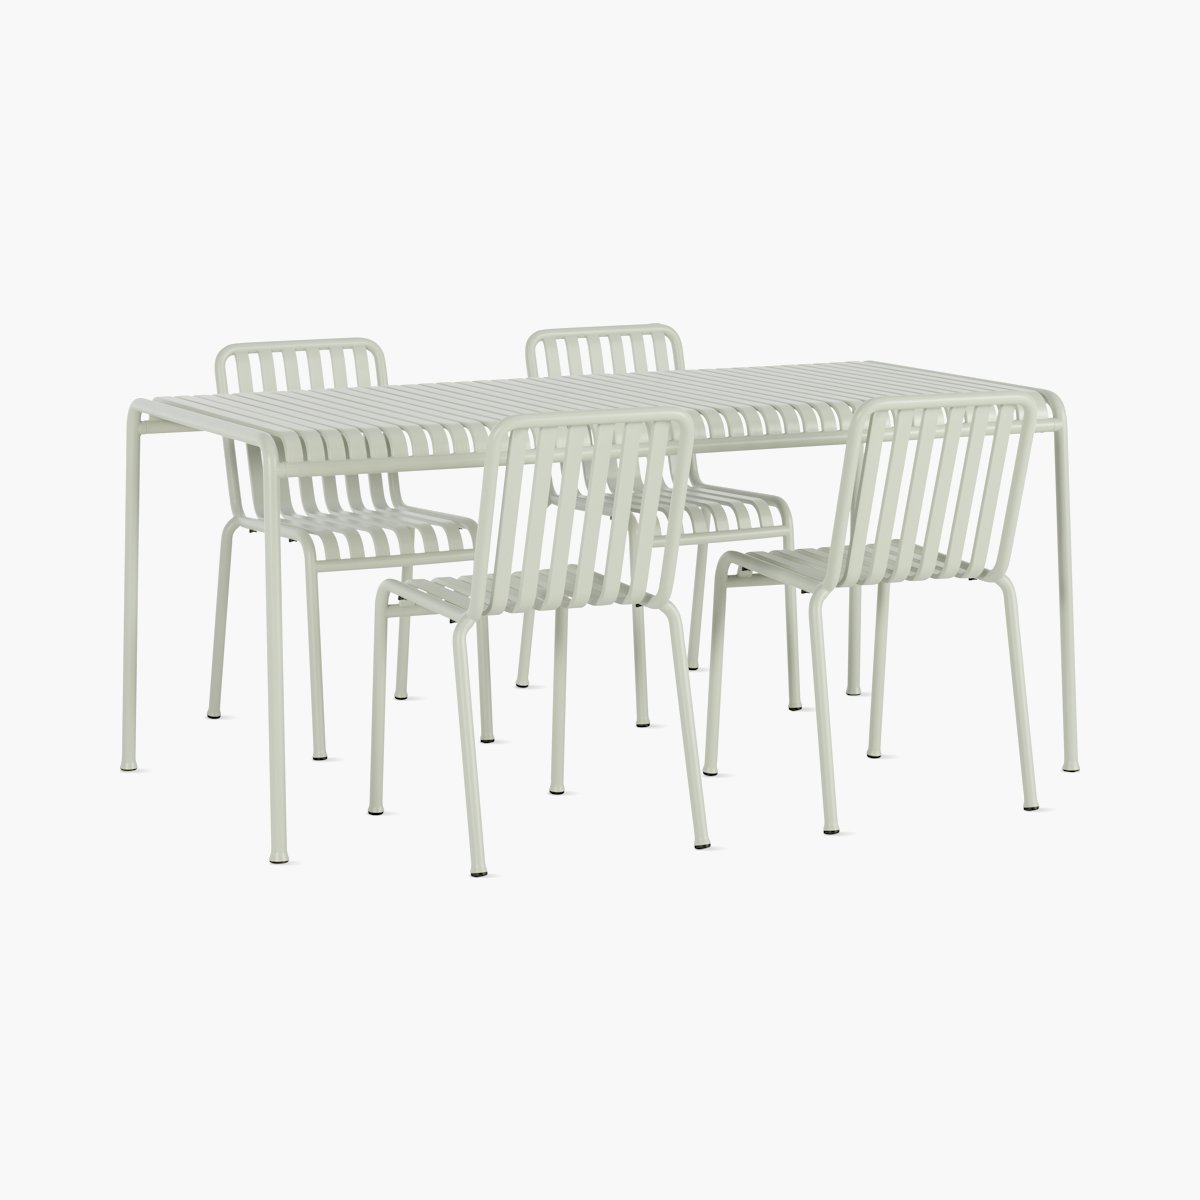 Palissade Dining Set, 4 Chairs